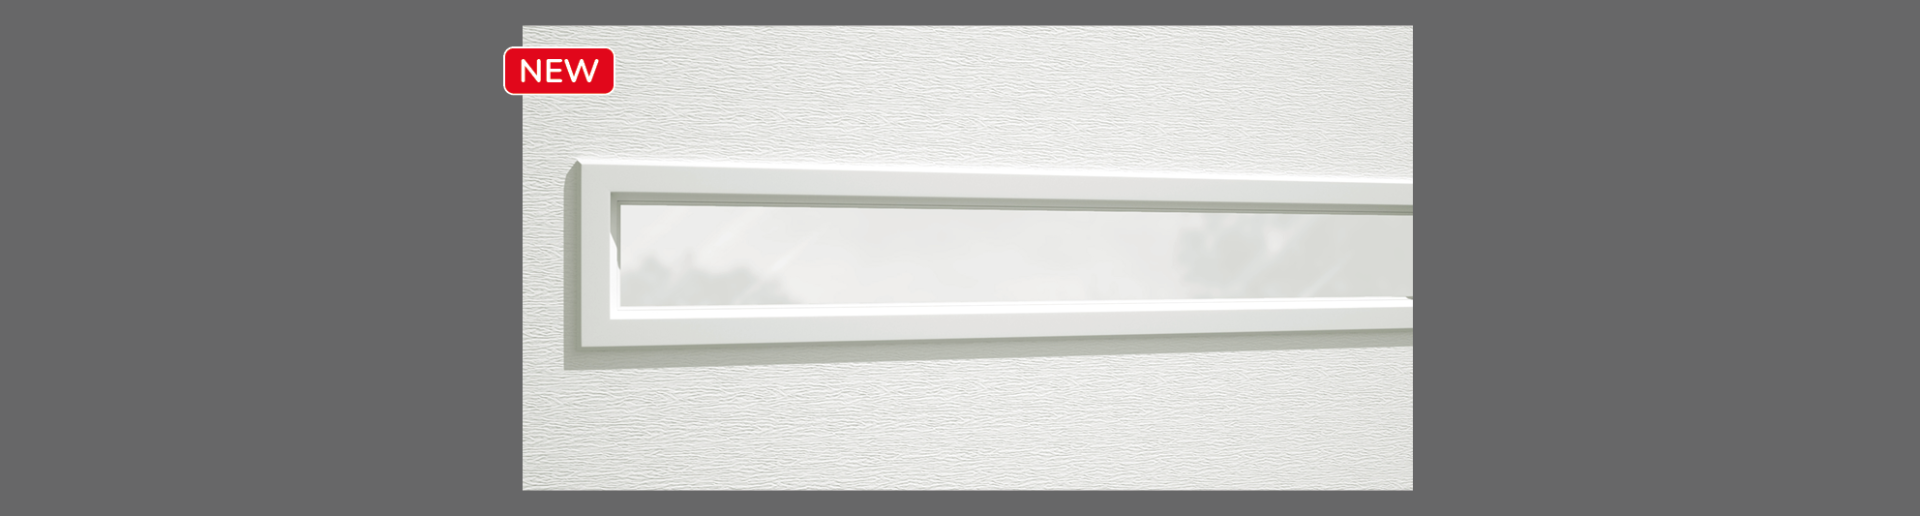 Slim Window, 40" x 7", available for door R-16, 3 layers - Polystyrene, 2 layers - Polystyrene and Non-insulated